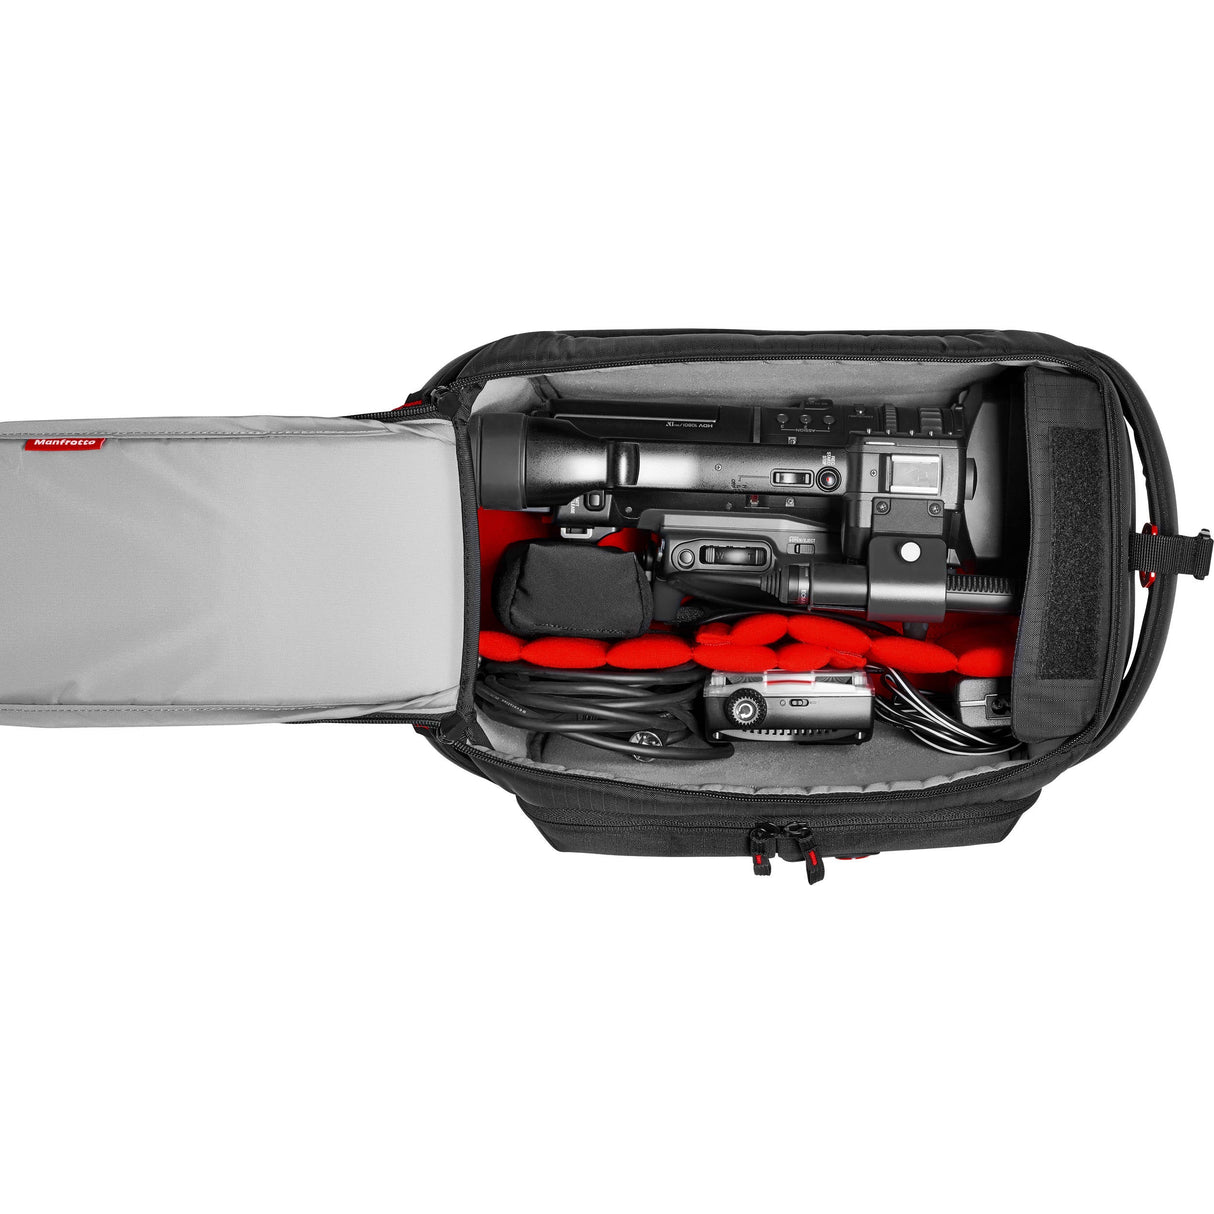 Manfrotto 191N Pro Light Camcorder Case for Sony PXW-FS5, Canon XF205, HDV, & VDSLR Cameras